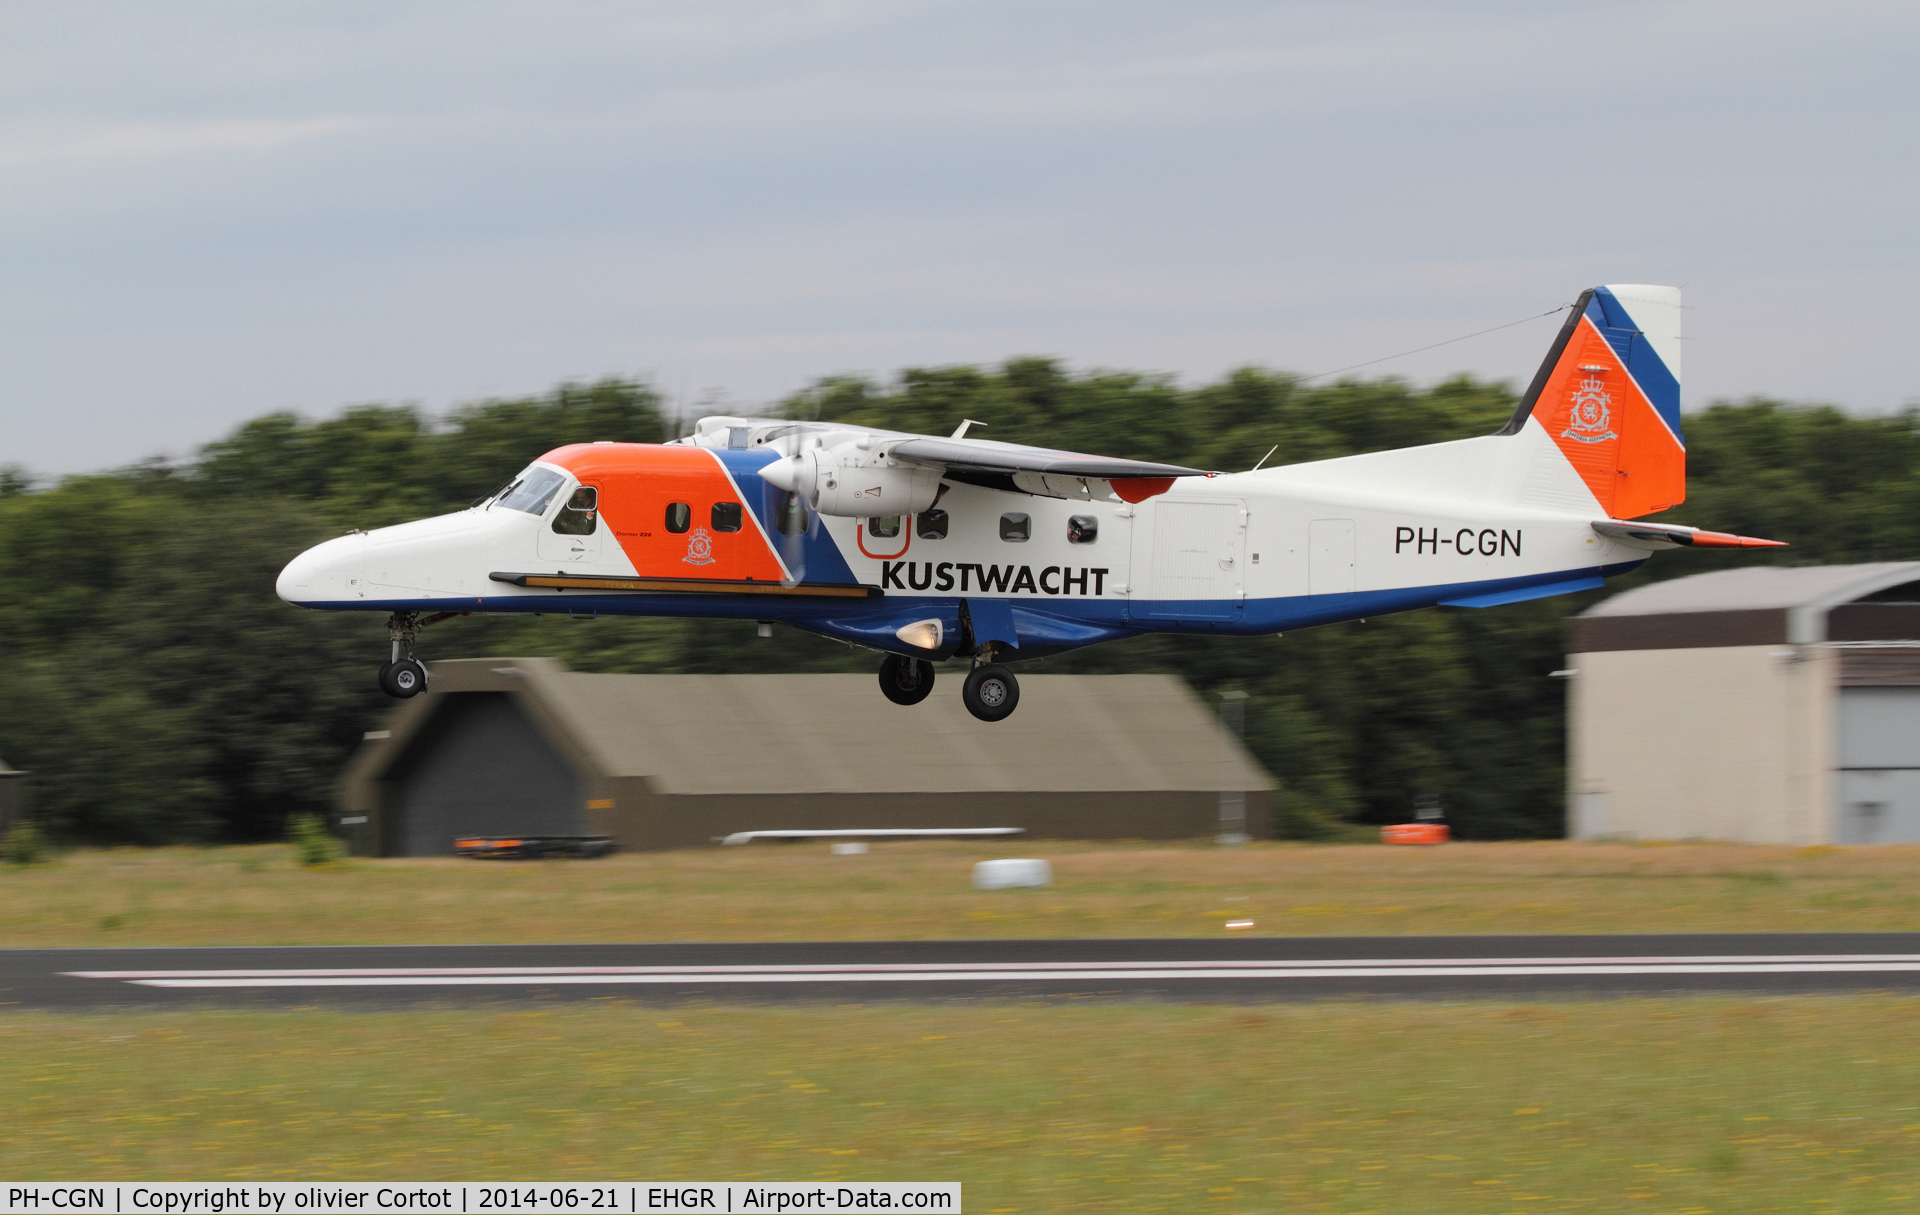 PH-CGN, 1990 Dornier 228-212 C/N 8181, about to land